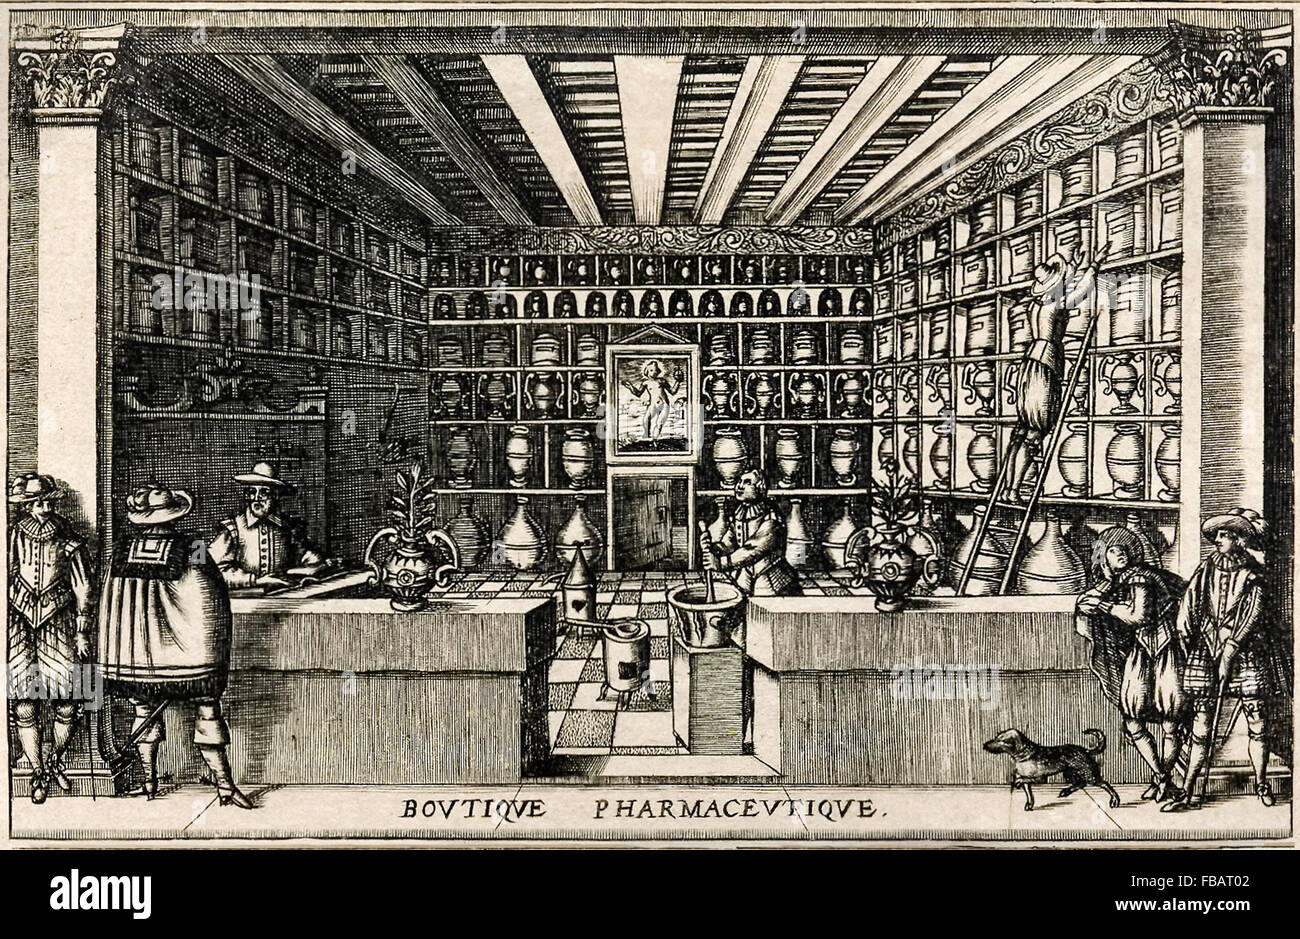 Illustration showing the inside of a French apothecary (pharmacist) in the early 17th century. See description for more information. Stock Photo